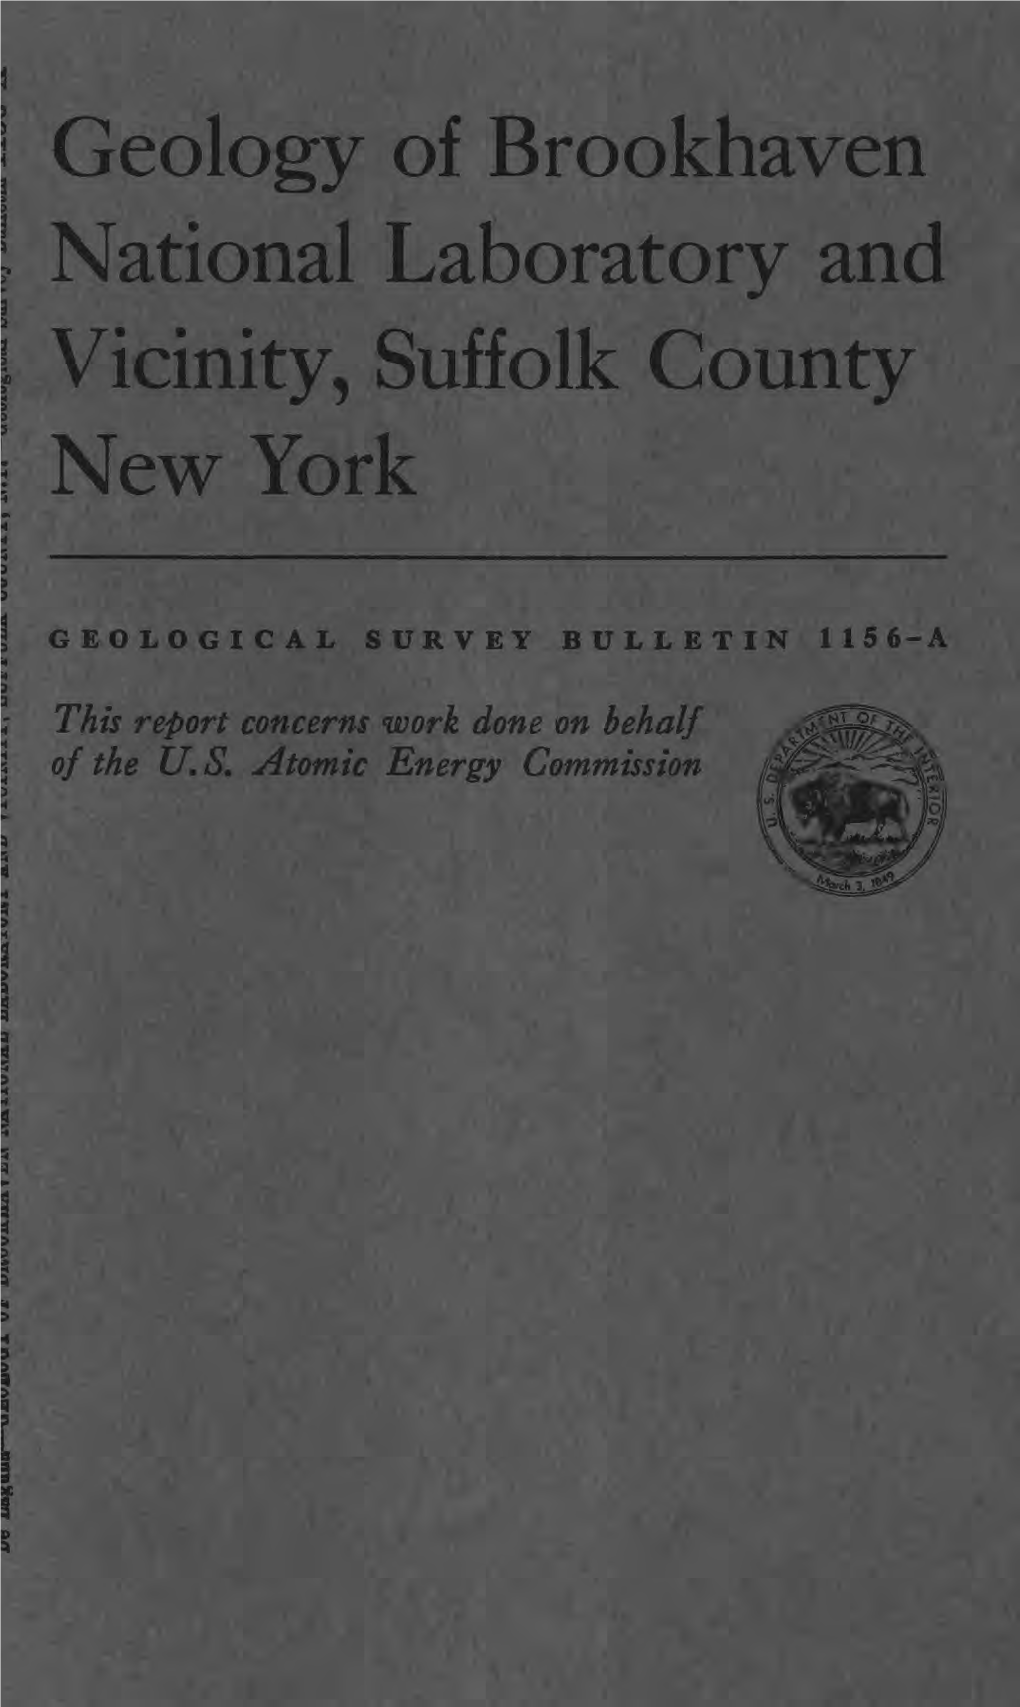 Geology of Brookhaven National Laboratory and Vicinity, Suffolk County New York